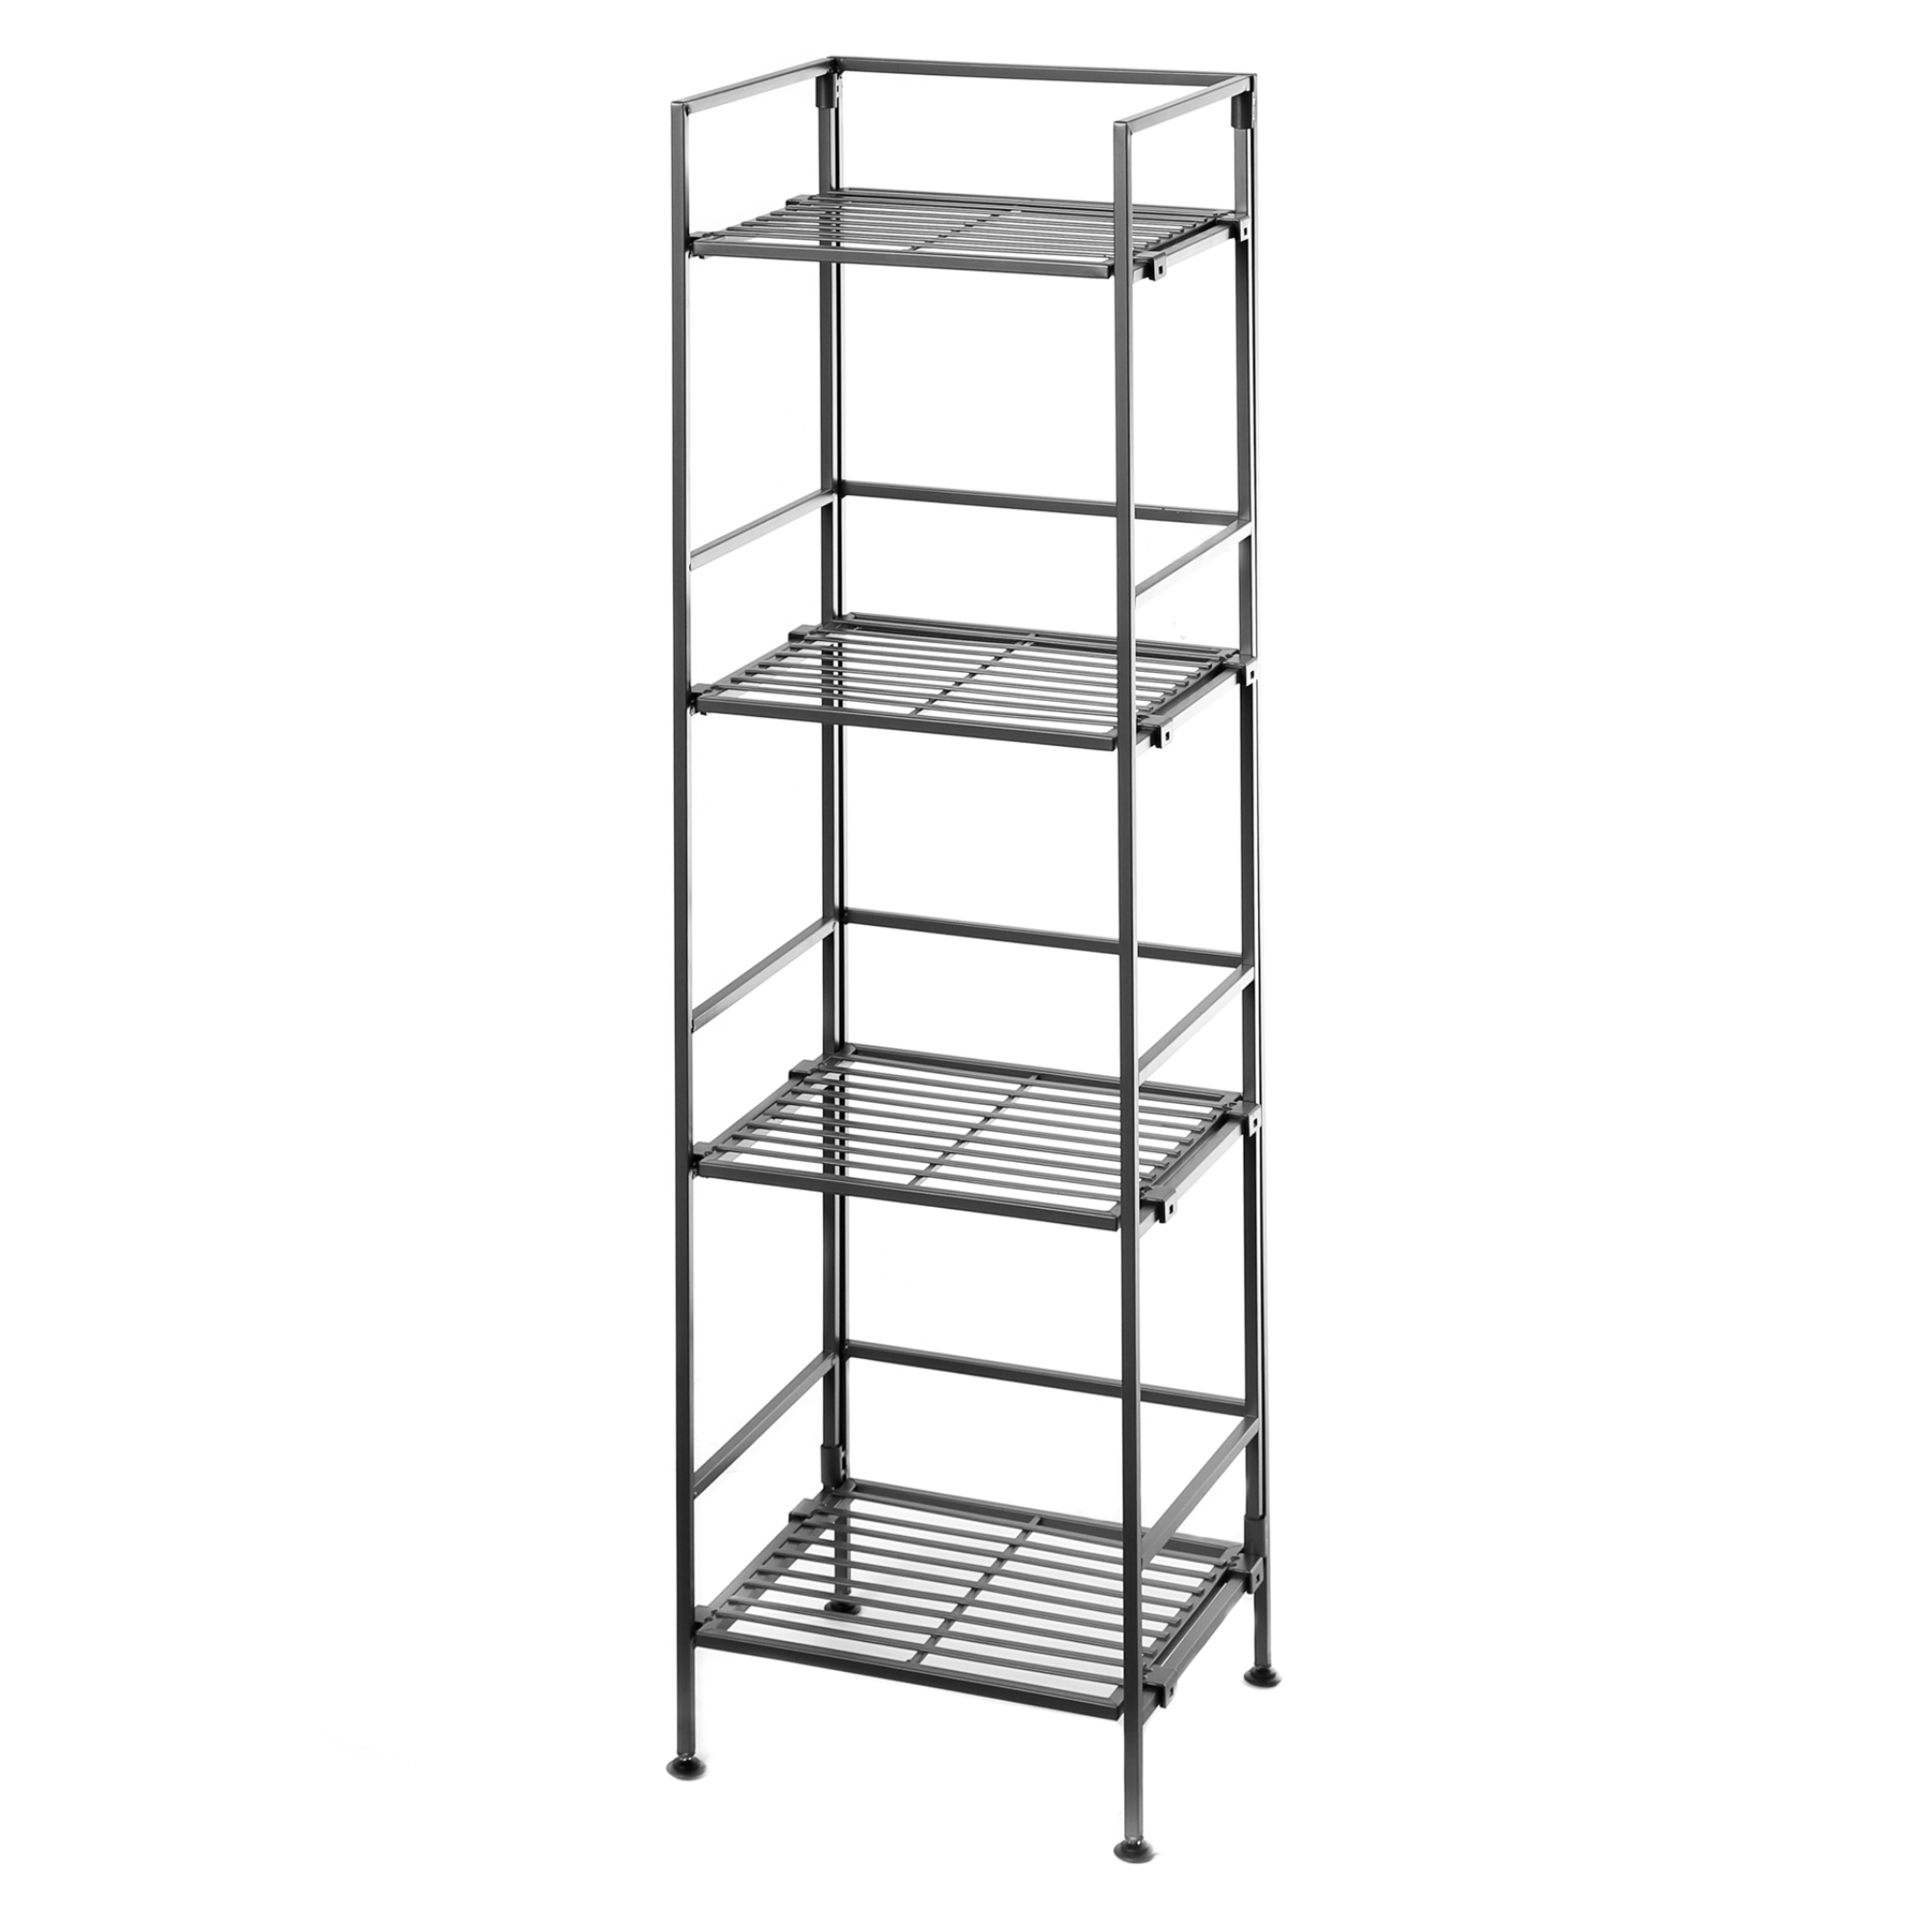 4-Tier Iron Tower Shelving, Pewter 11.3"D x 13"W x 44.3"H by Seville Classics - image 1 of 8